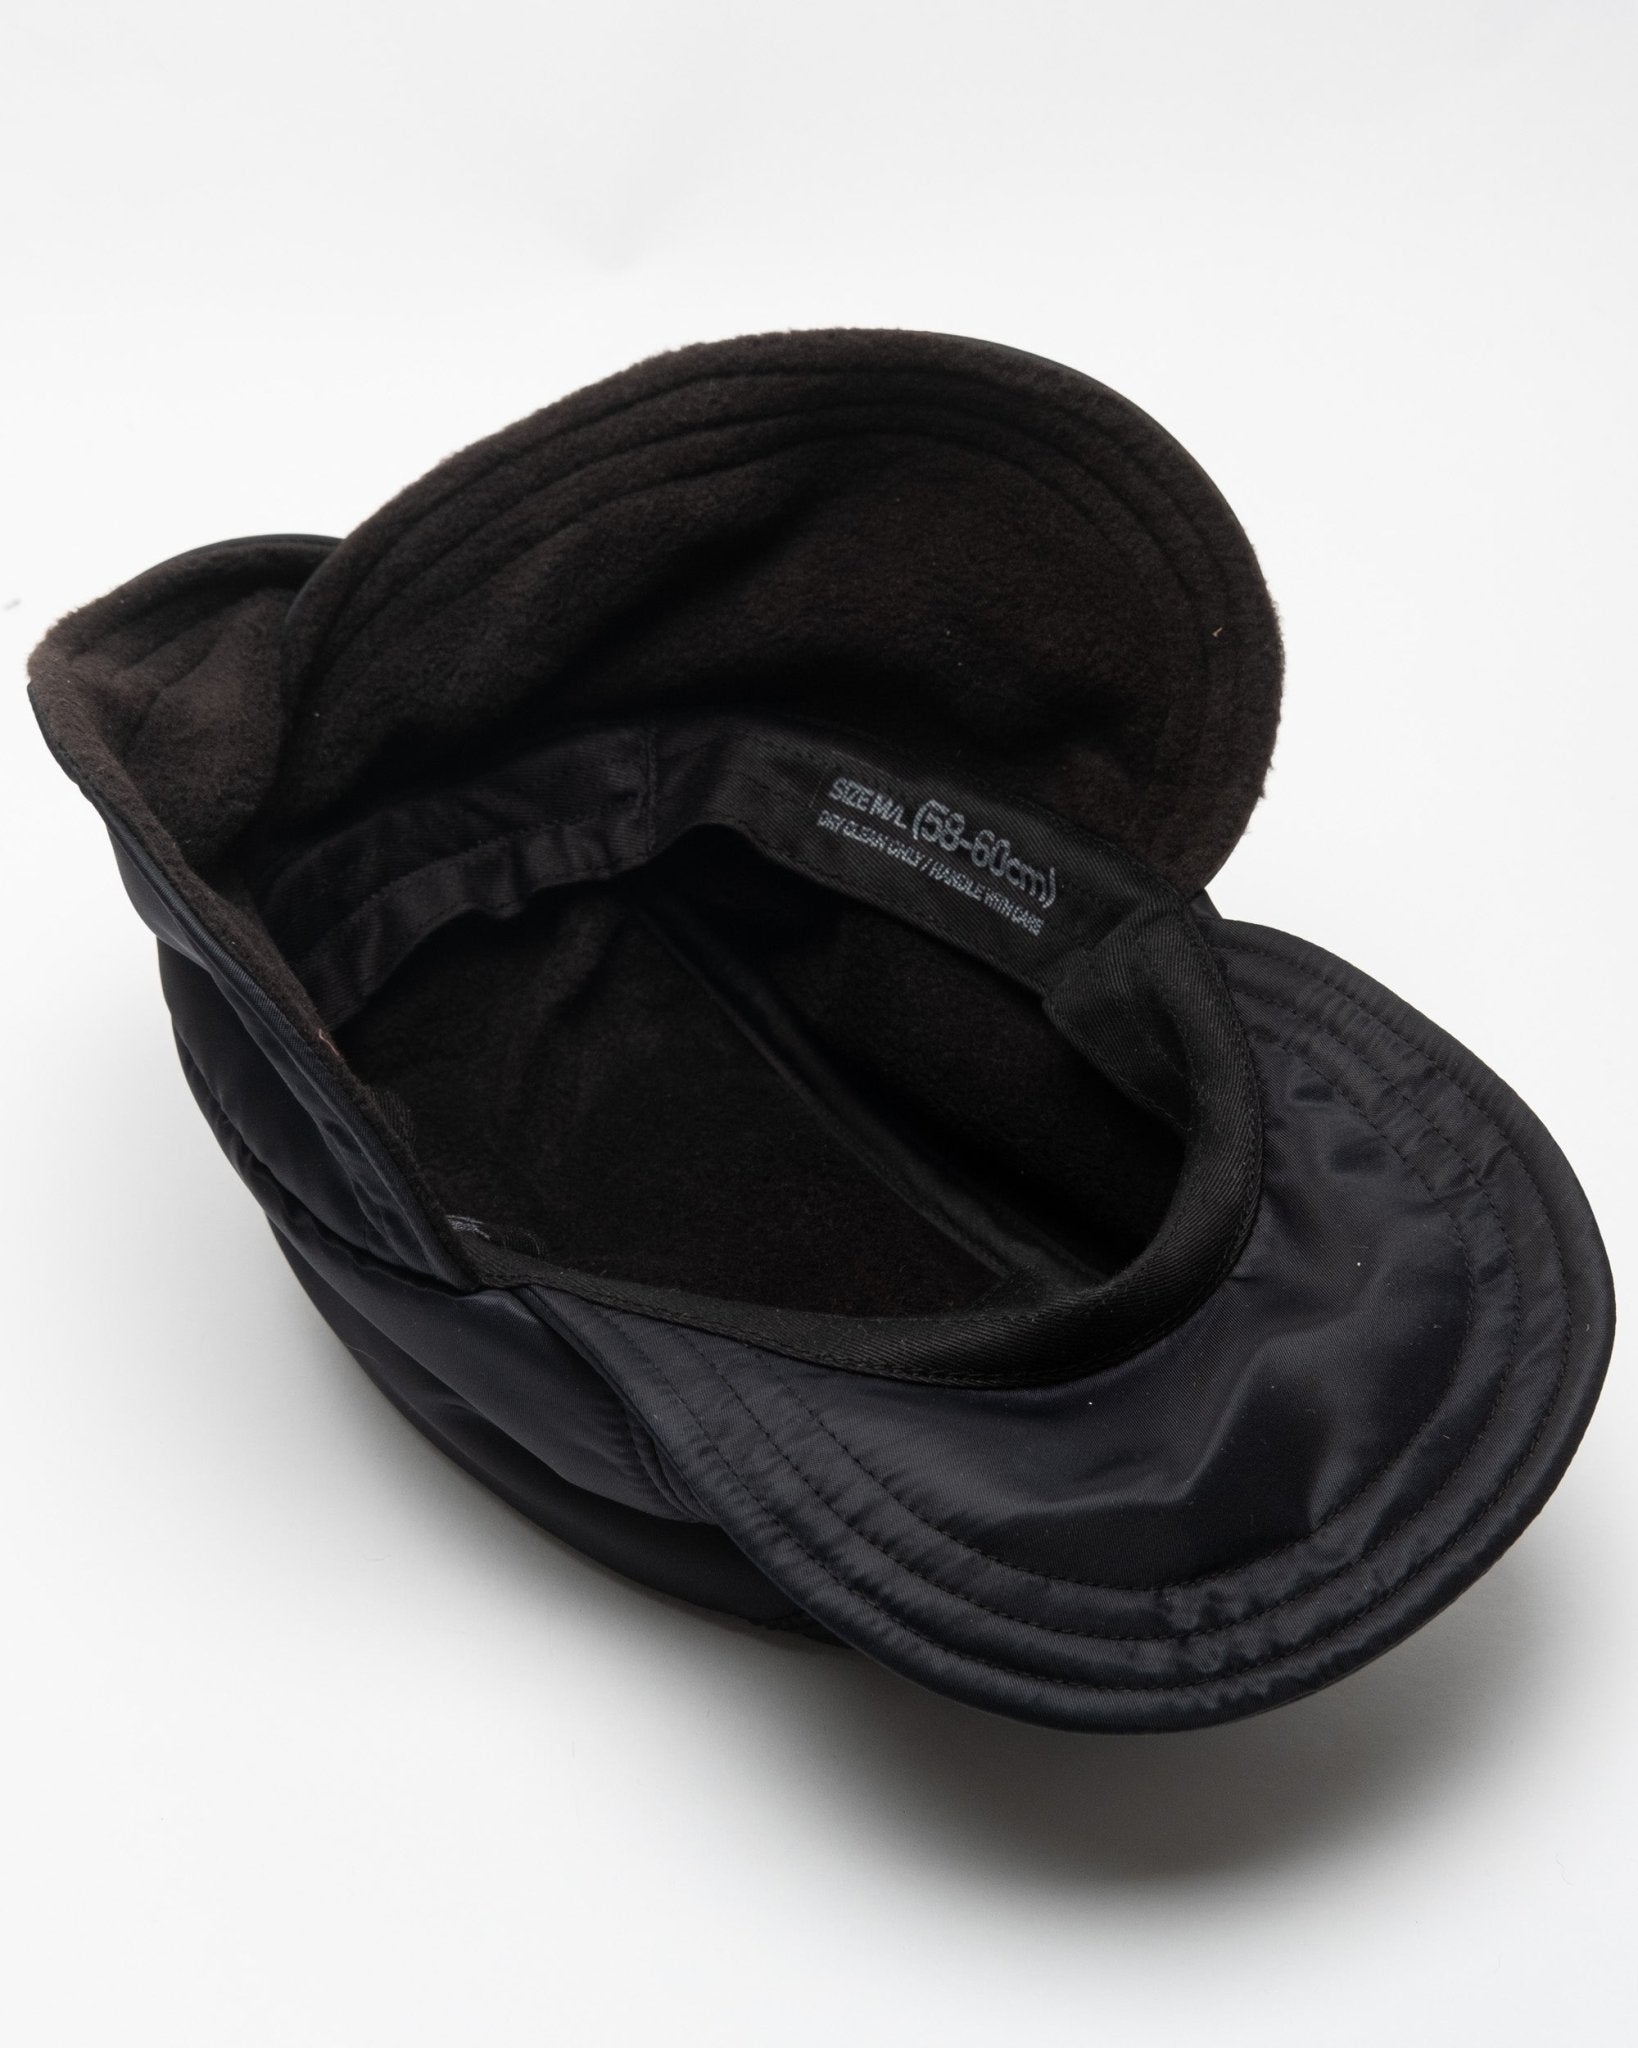 Lily Pad Hat Black - Meadow